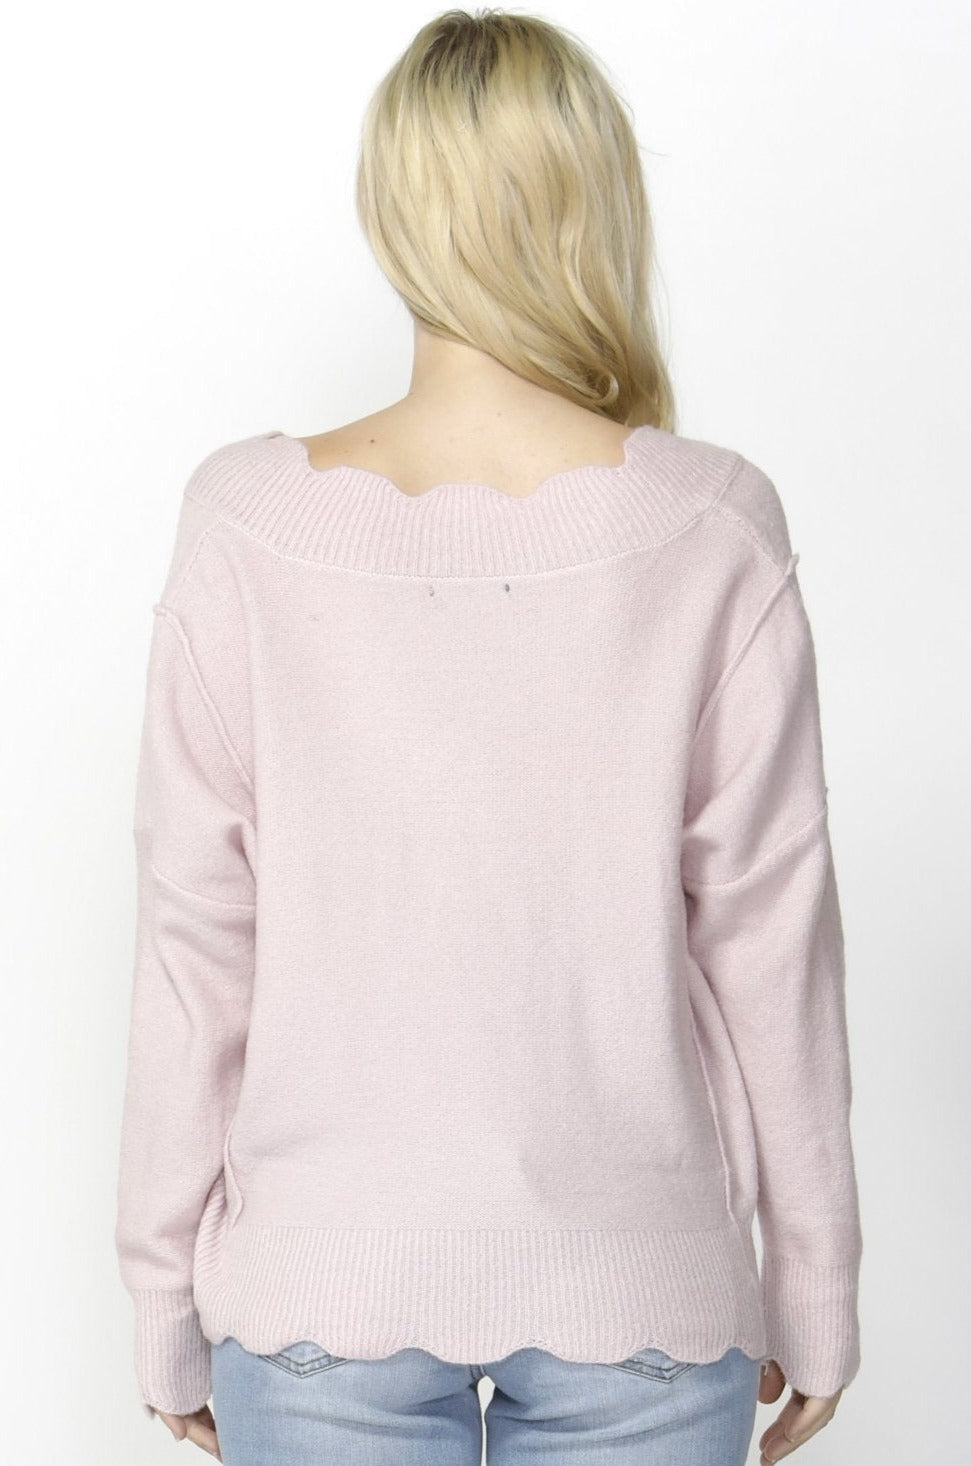 Sass Out of My Mind Scallop Knit in Powder Pink - Hey Sara